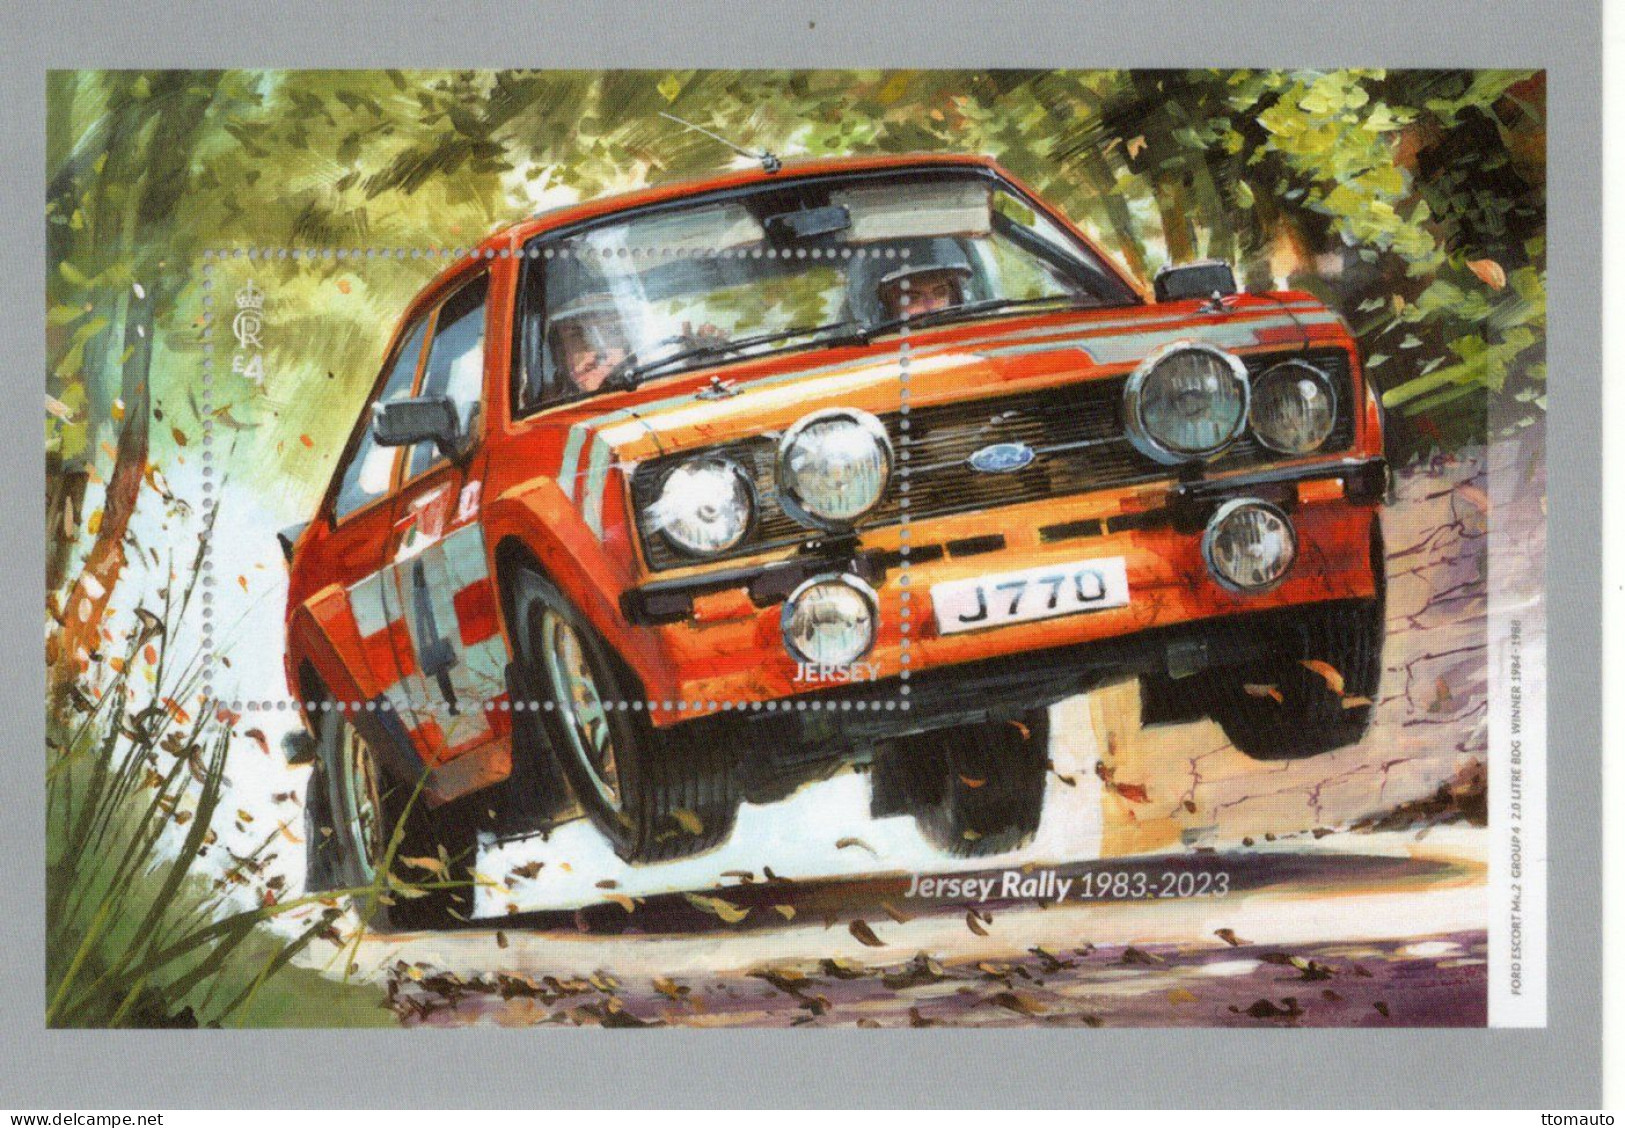 Ford Escort RS1800 -  40 Years Of Jersey Rally - Jersey PHQ Postcard - Rally Racing